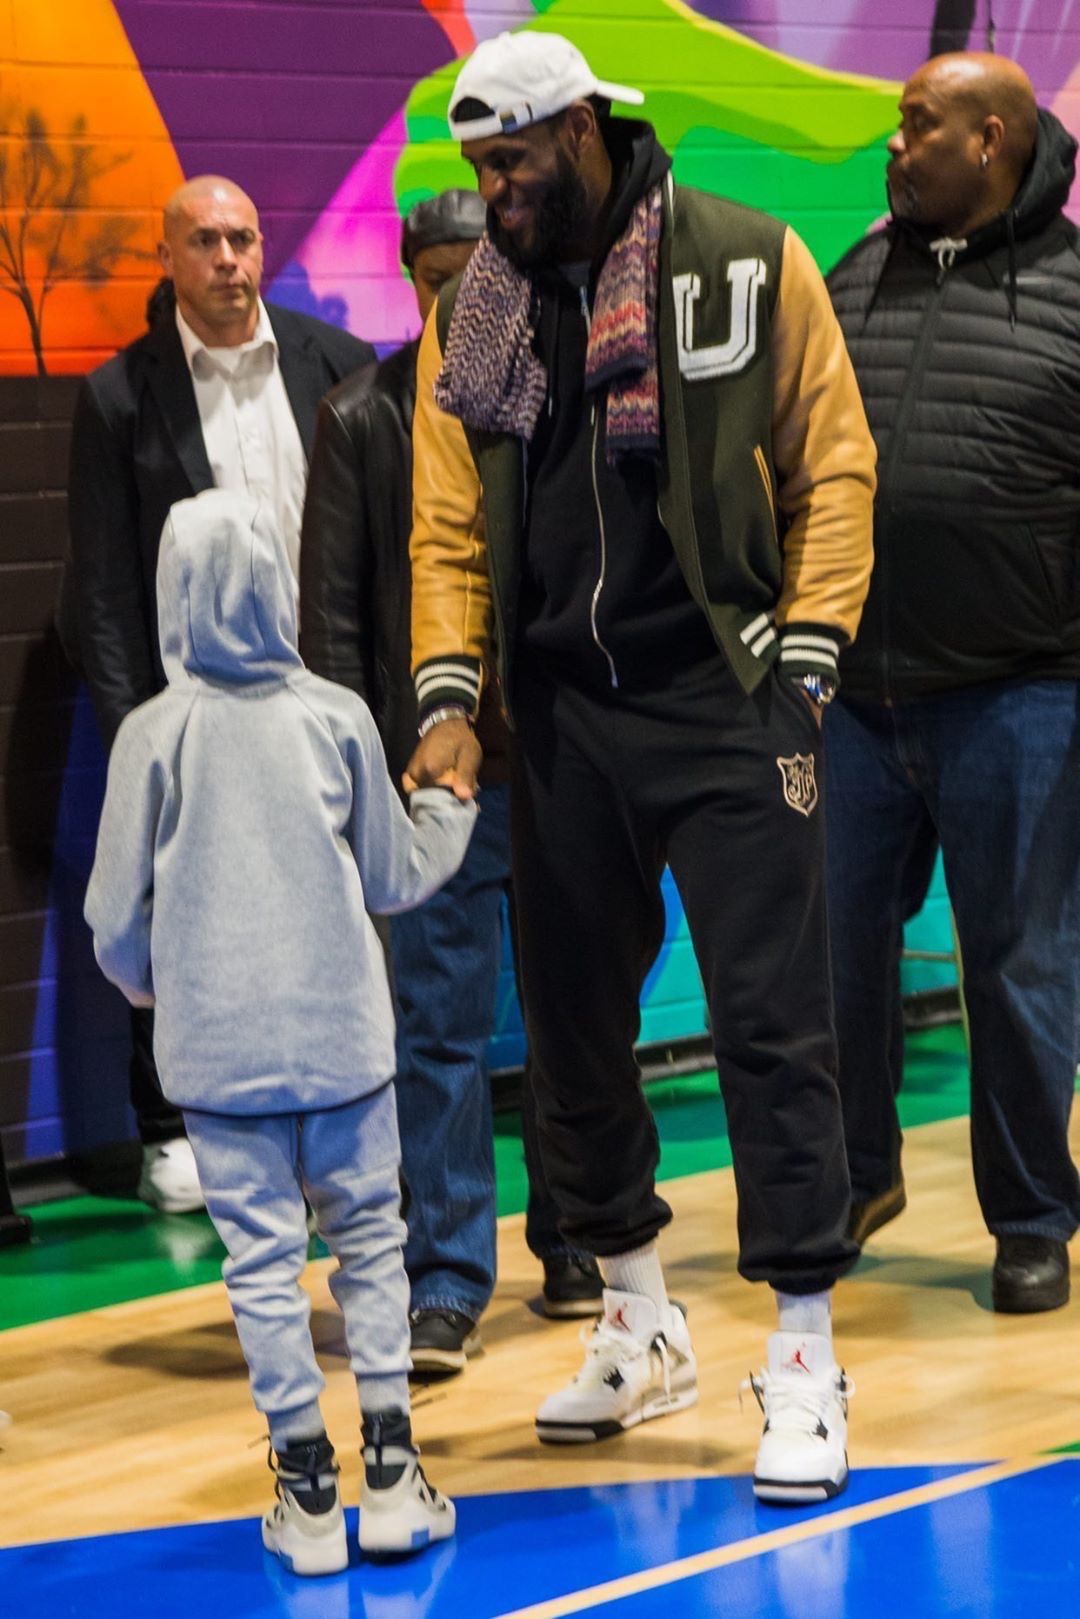 LeBron James Steps Out in Very Tight Sweatpants: Photo 3603263, LeBron  James Photos